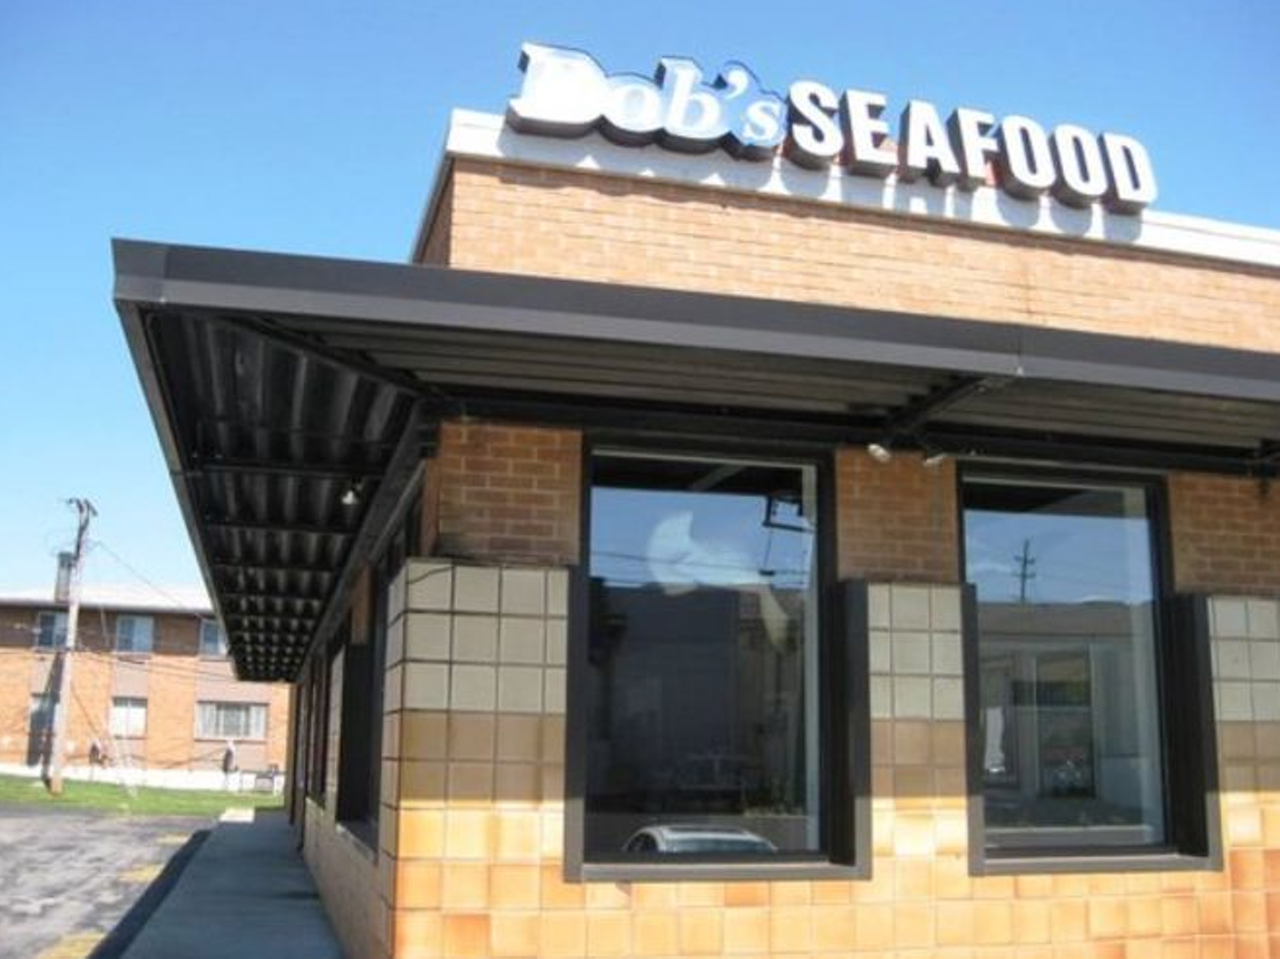 Bob's Seafood - Best Fresh Seafood Counter
Here in 100 percent ocean-free St. Louis, it's hard to know the great sea and its delicious culinary treasures, which is why we are so grateful that we have Bob's Seafood to broaden our horizons.